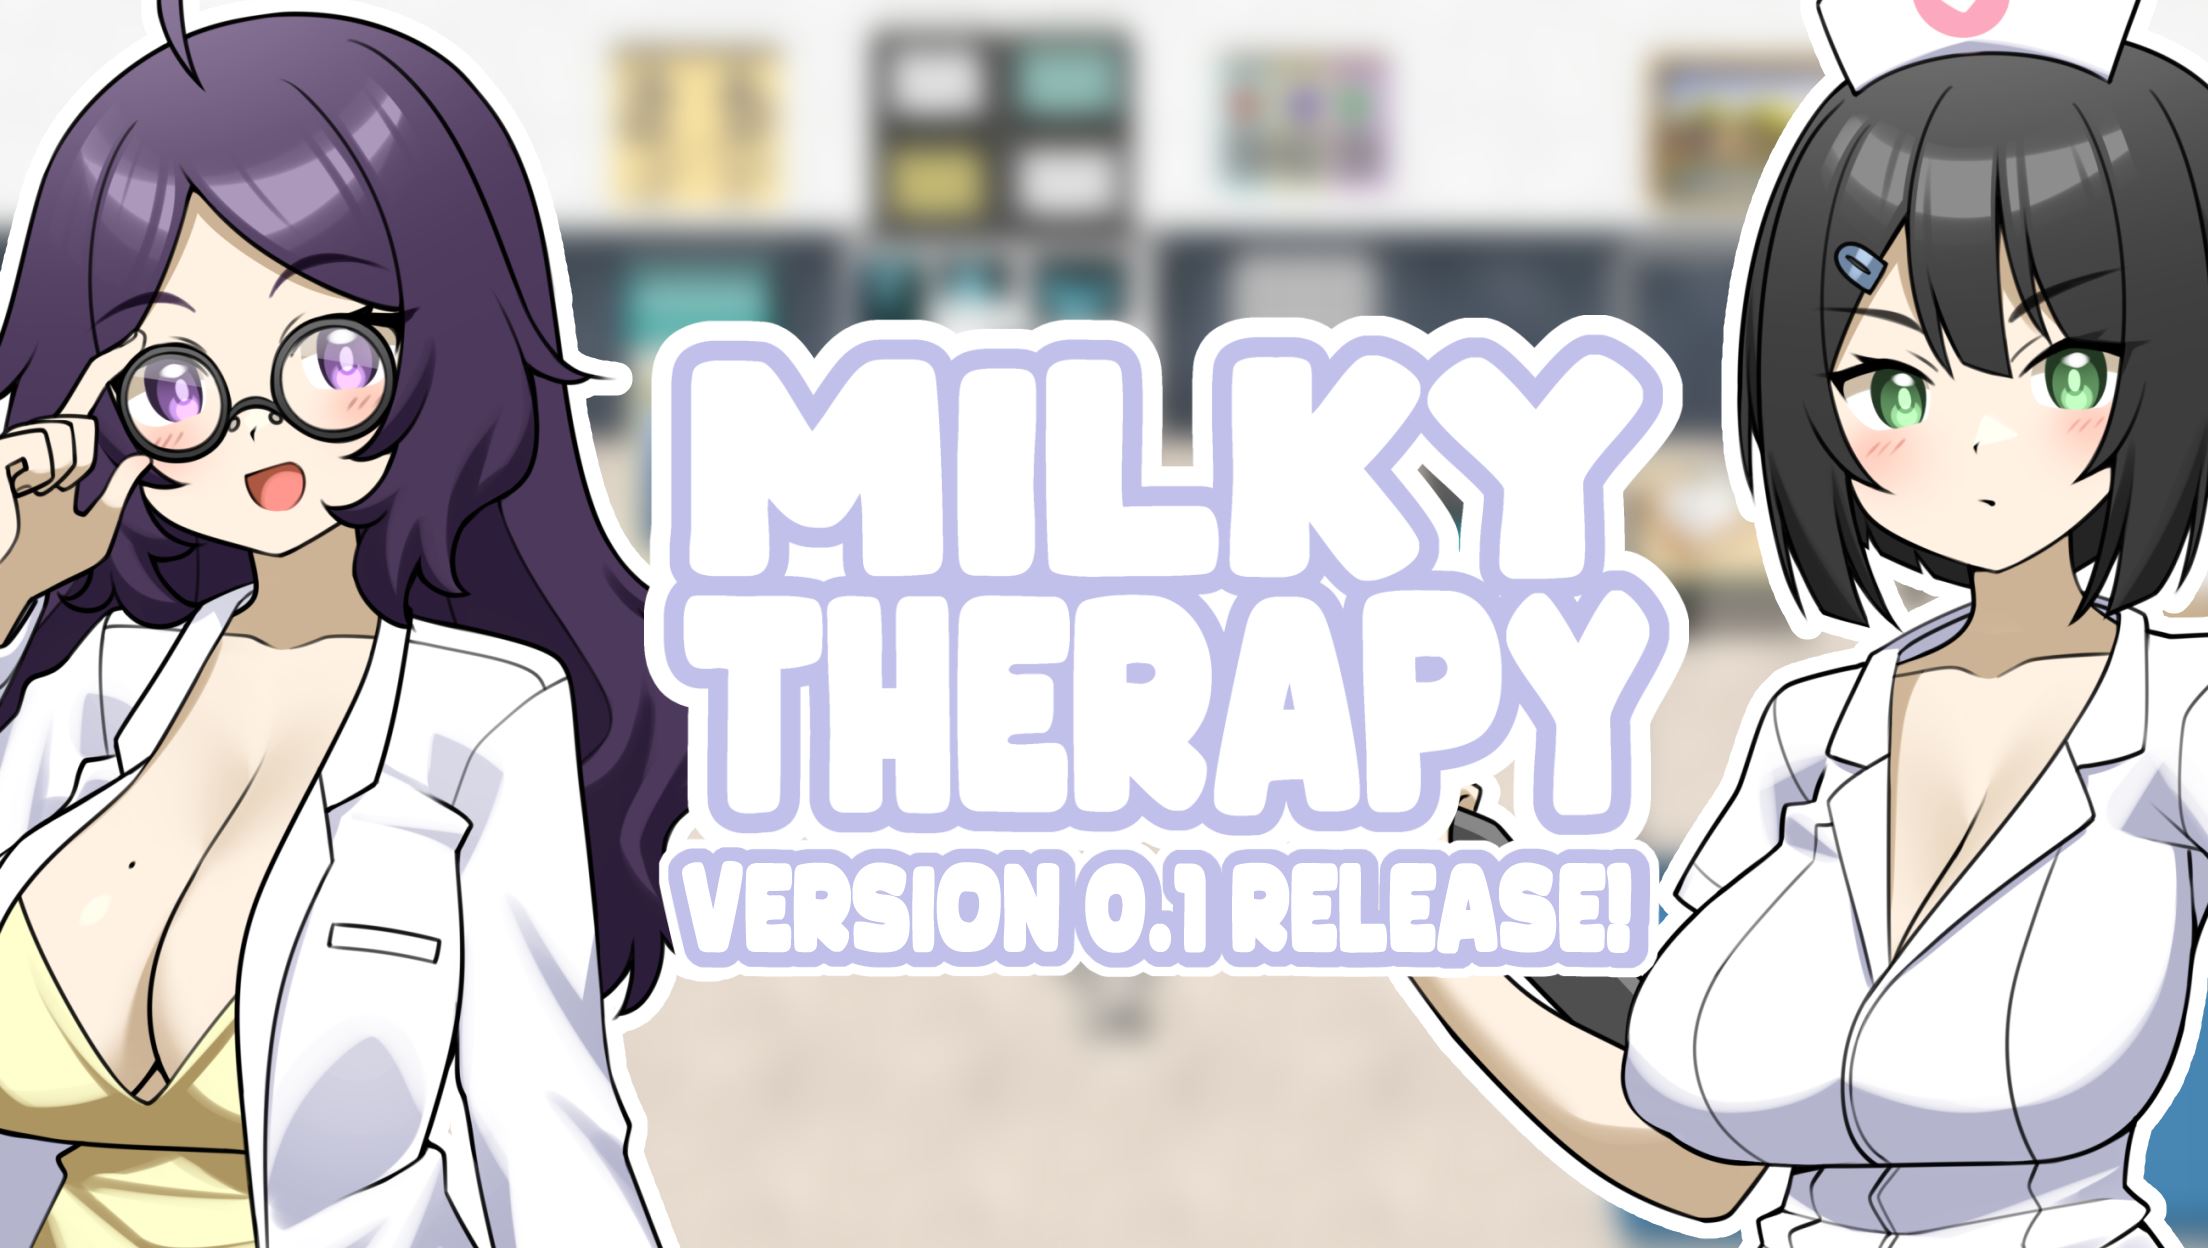 Milky Therapy [Ongoing] - Version: 0.1